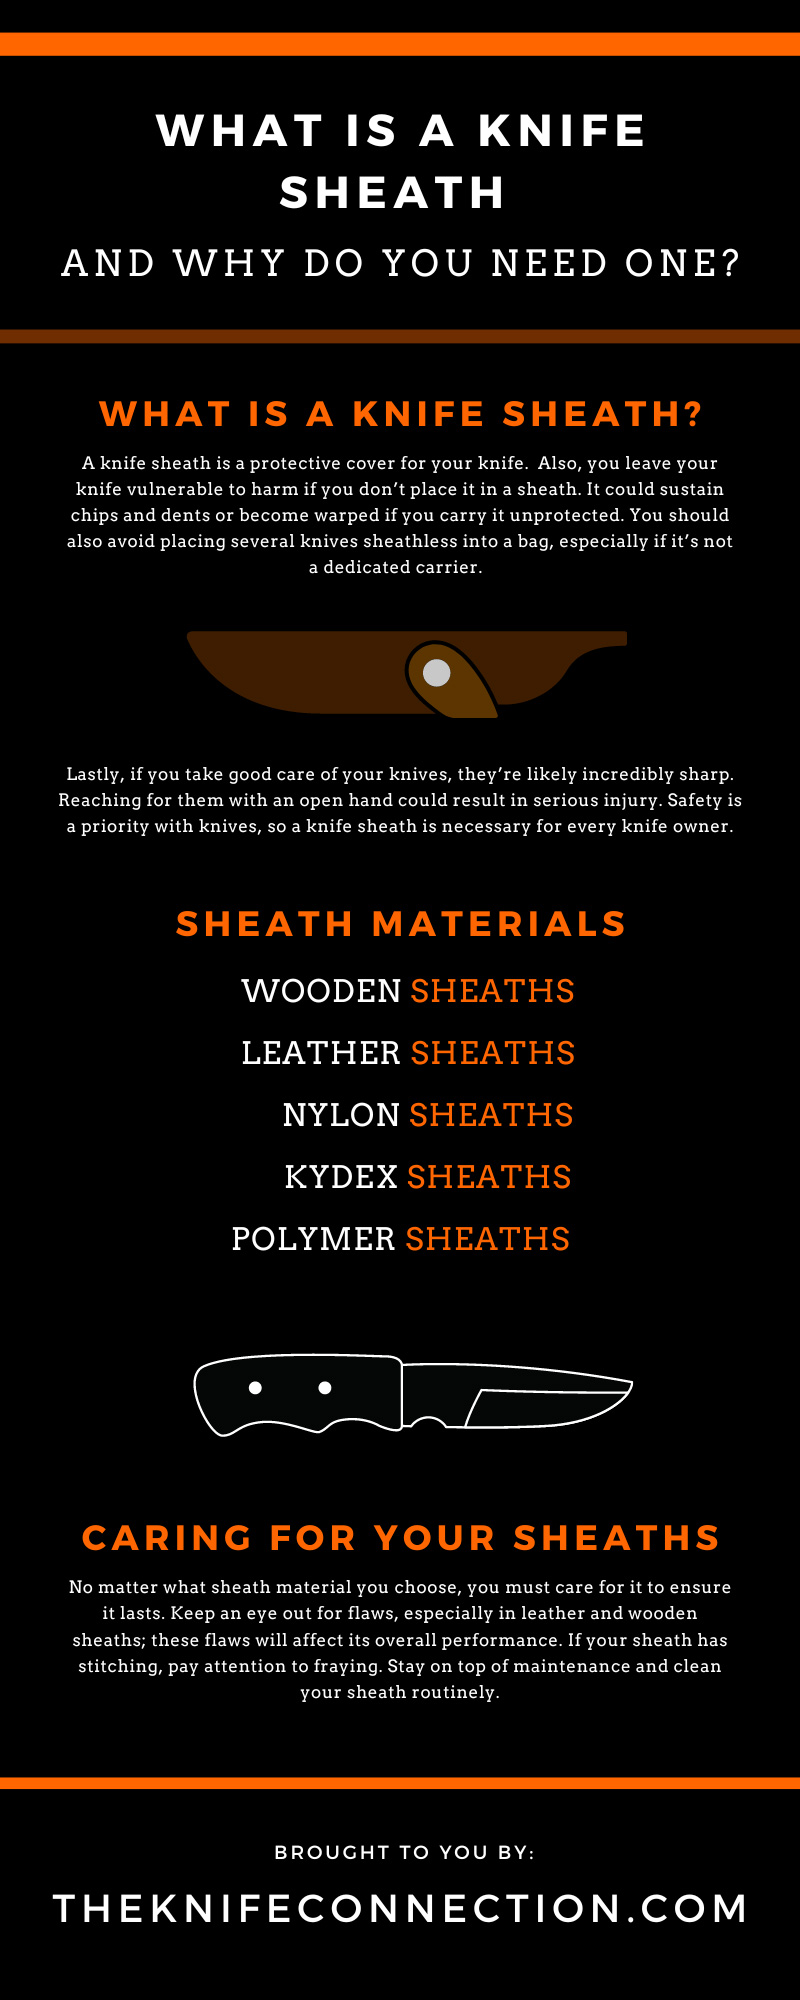 What Is a Knife Sheath and Why Do You Need One?